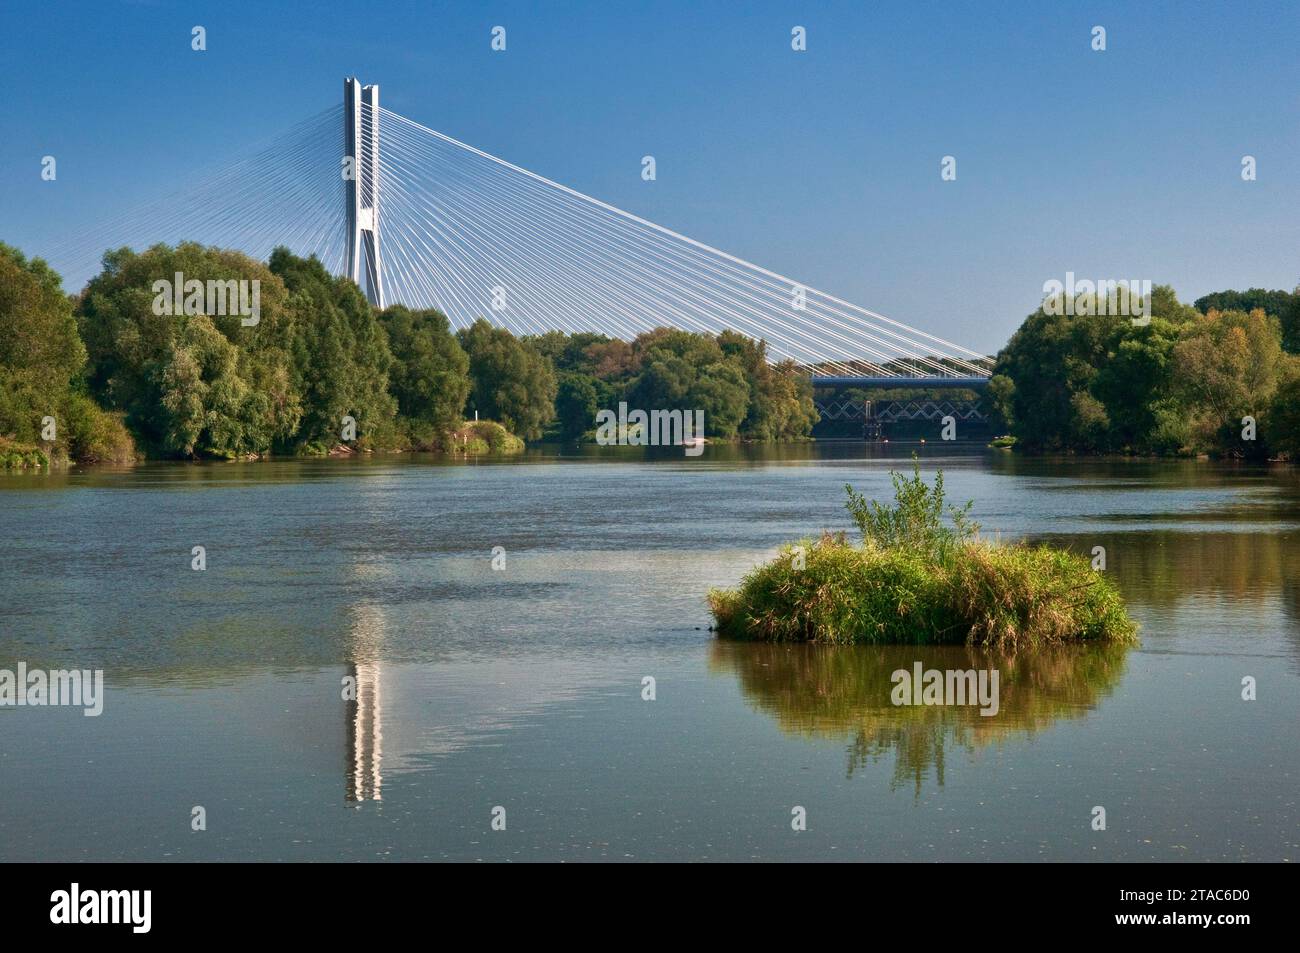 Redzinski Bridge, the world's fourth largest cable-stayed concrete bridge, over Oder river at motorway ring road in Wroclaw, Lower Silesia, Poland Stock Photo